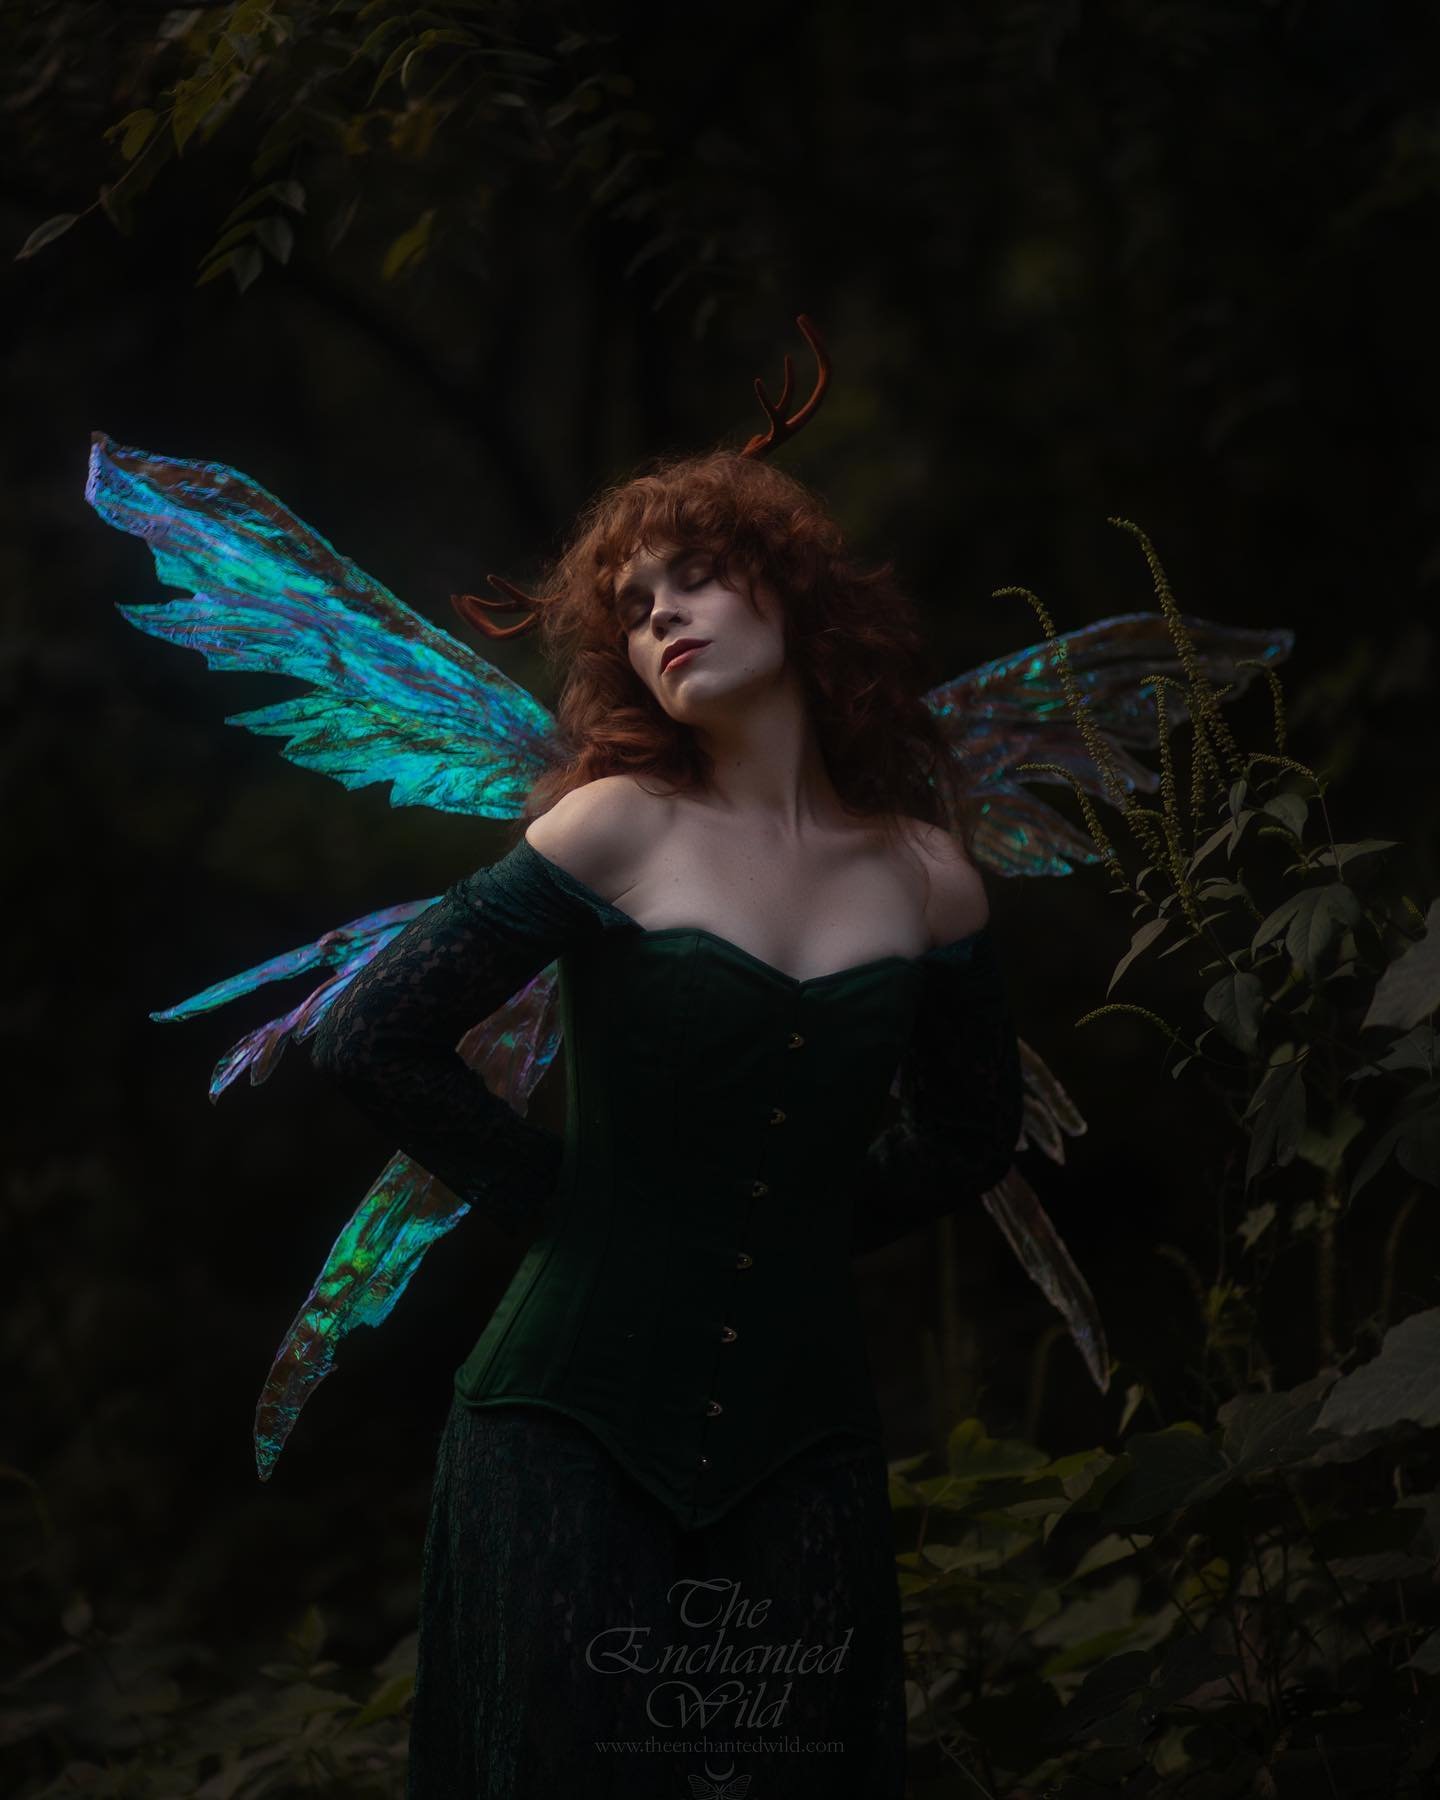 Collaborated with one of my favourite faeries to showcase the variety of possibilities we offer! We captured most of the wings available for photoshoots with three different looks. Here is our second with a beautiful earth fae including antlers also 